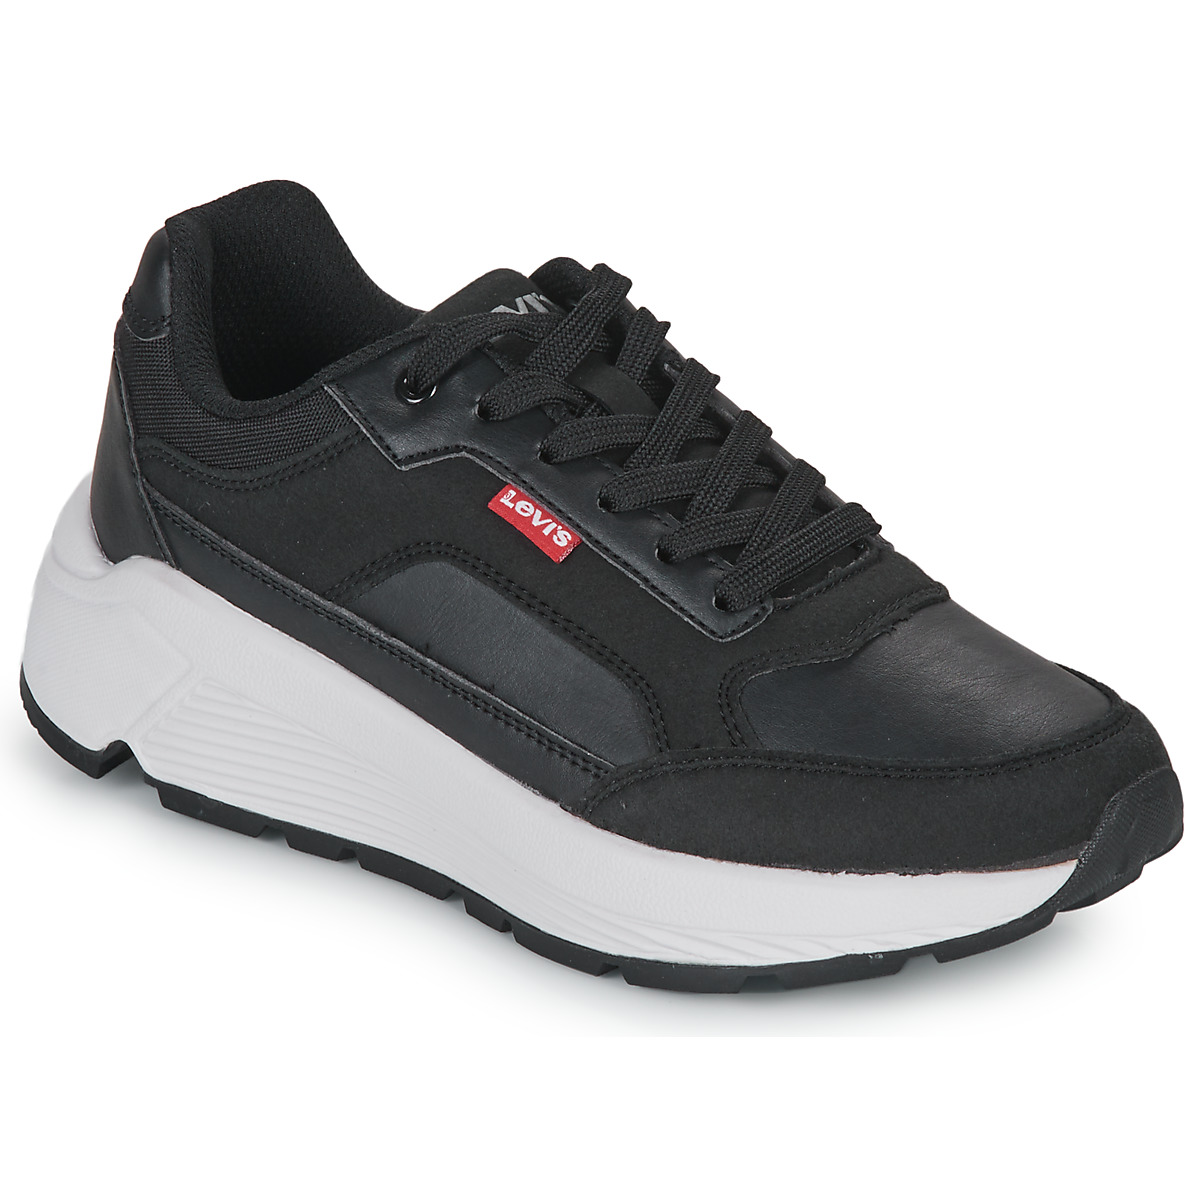 Levis Shoes - Best Price in Singapore - Apr 2023 